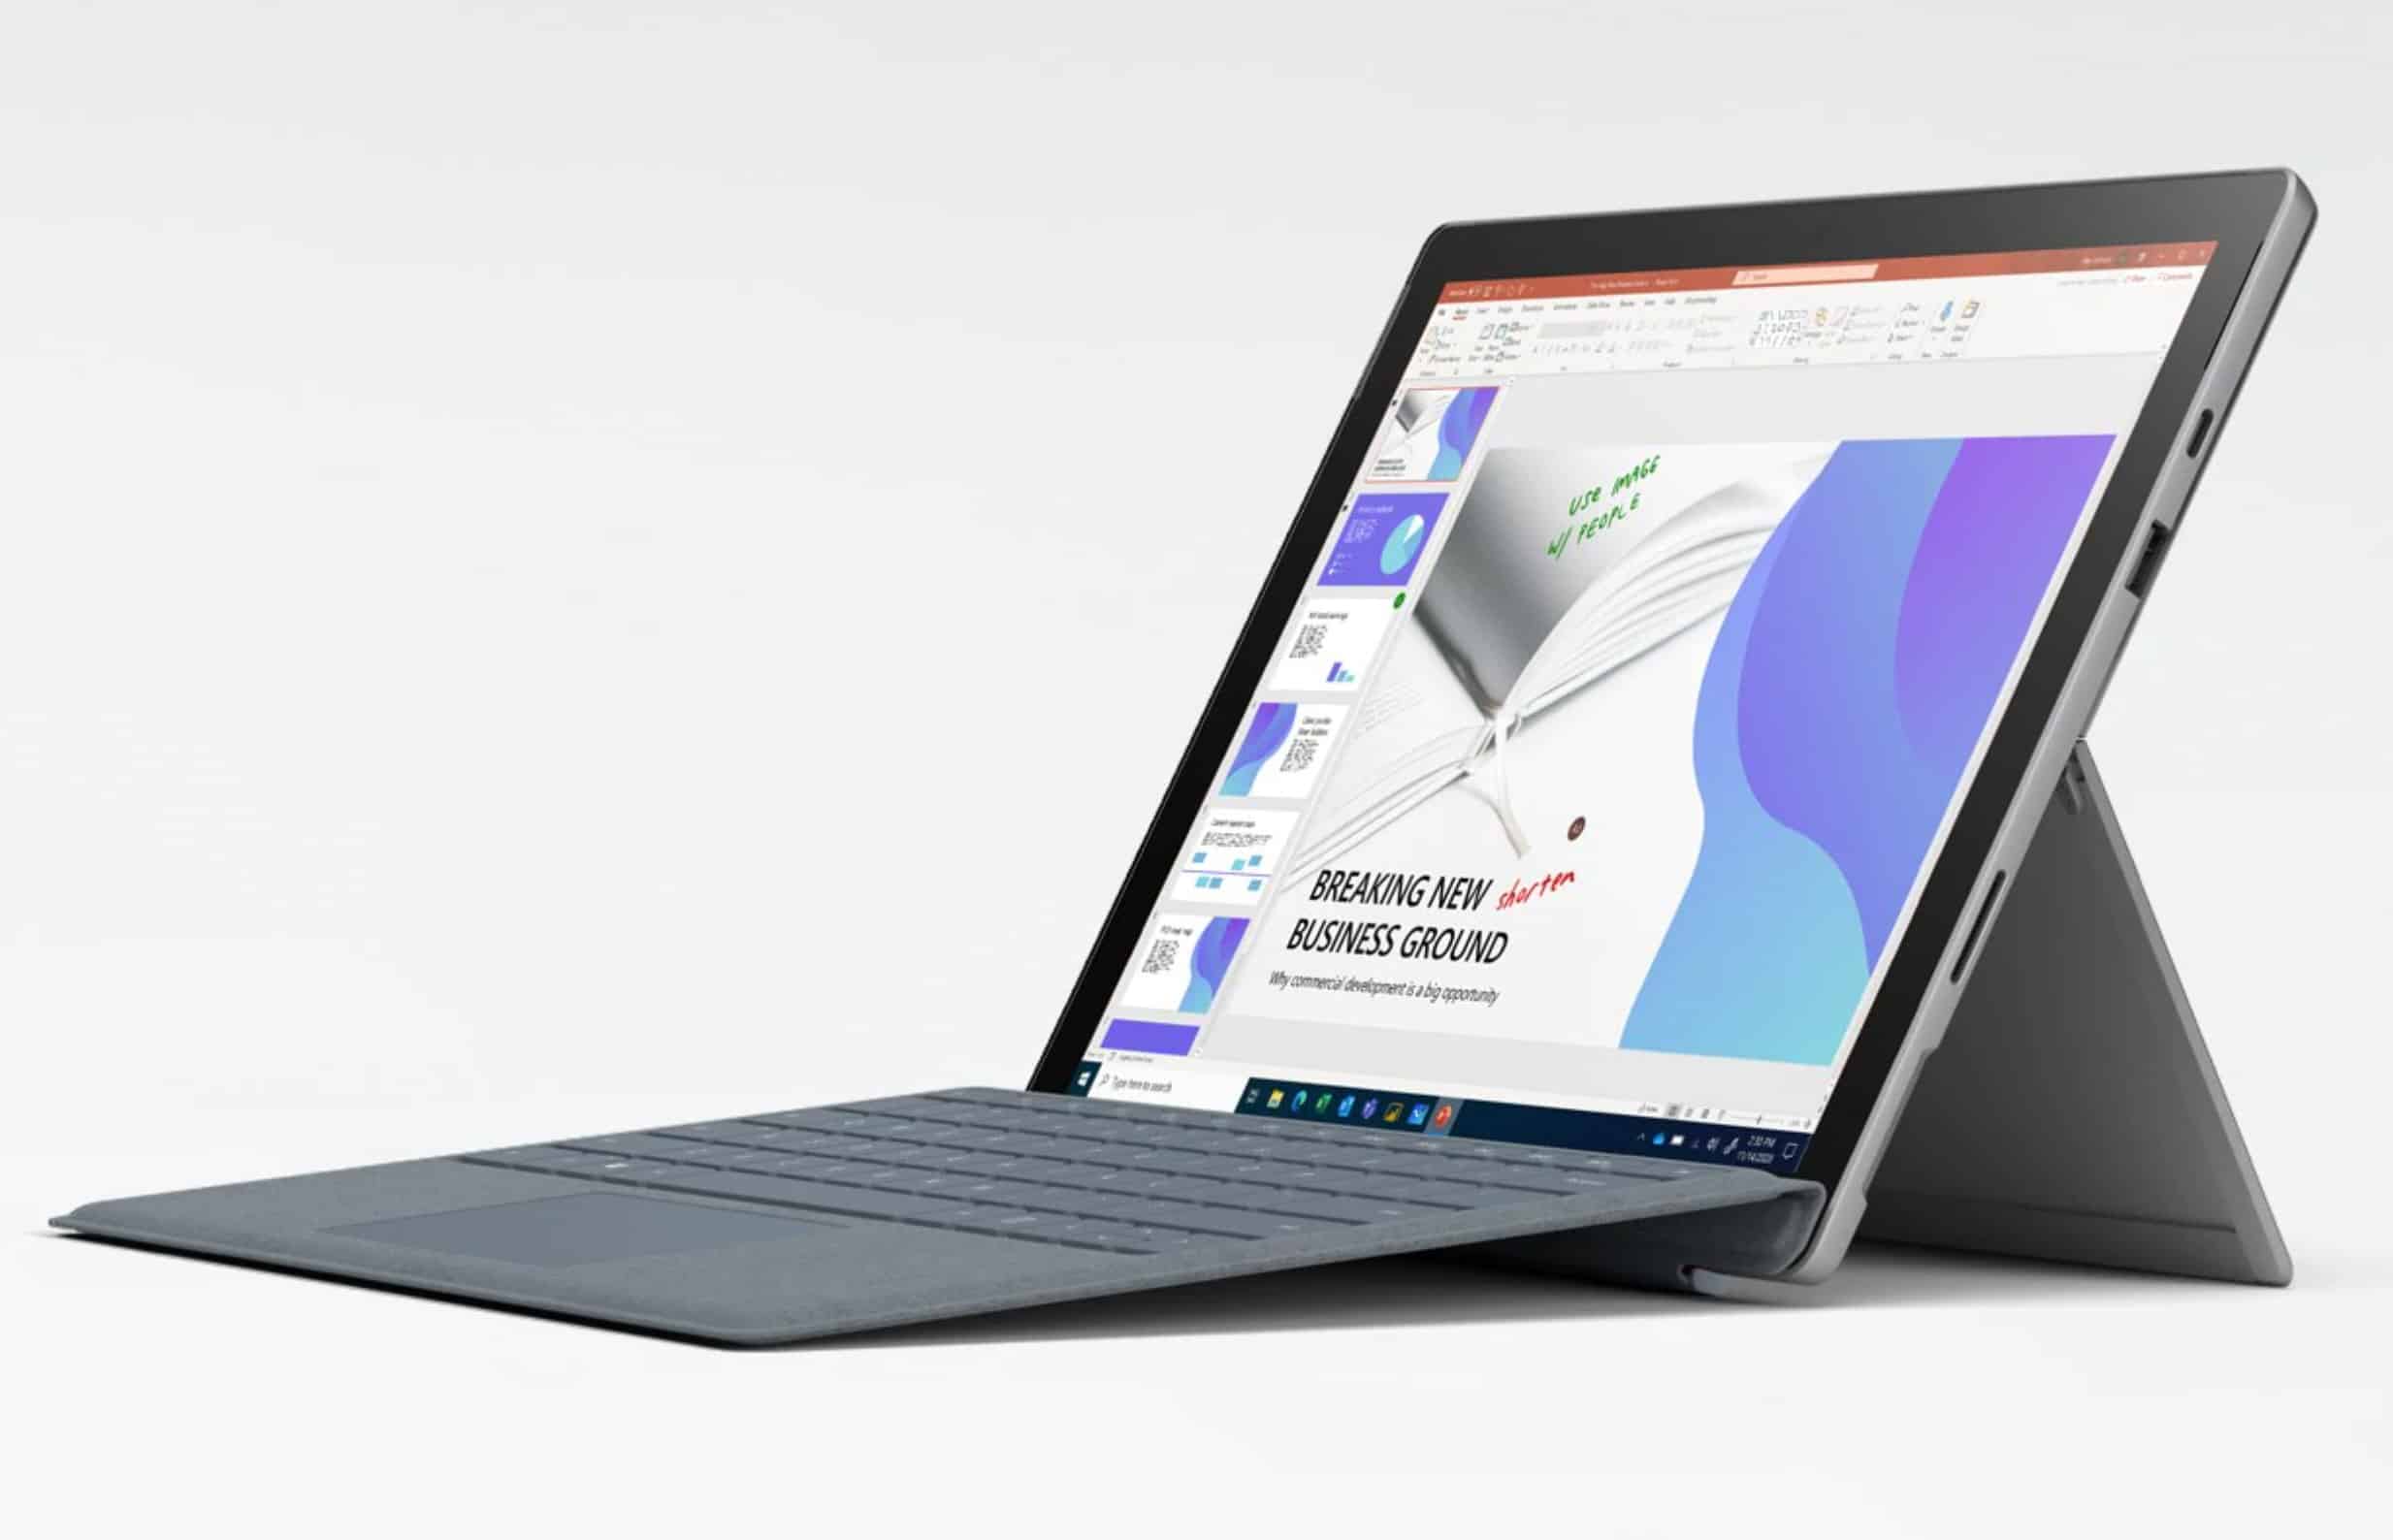 Microsoft's new Surface Pro 7+ for Business is aimed at remote workers